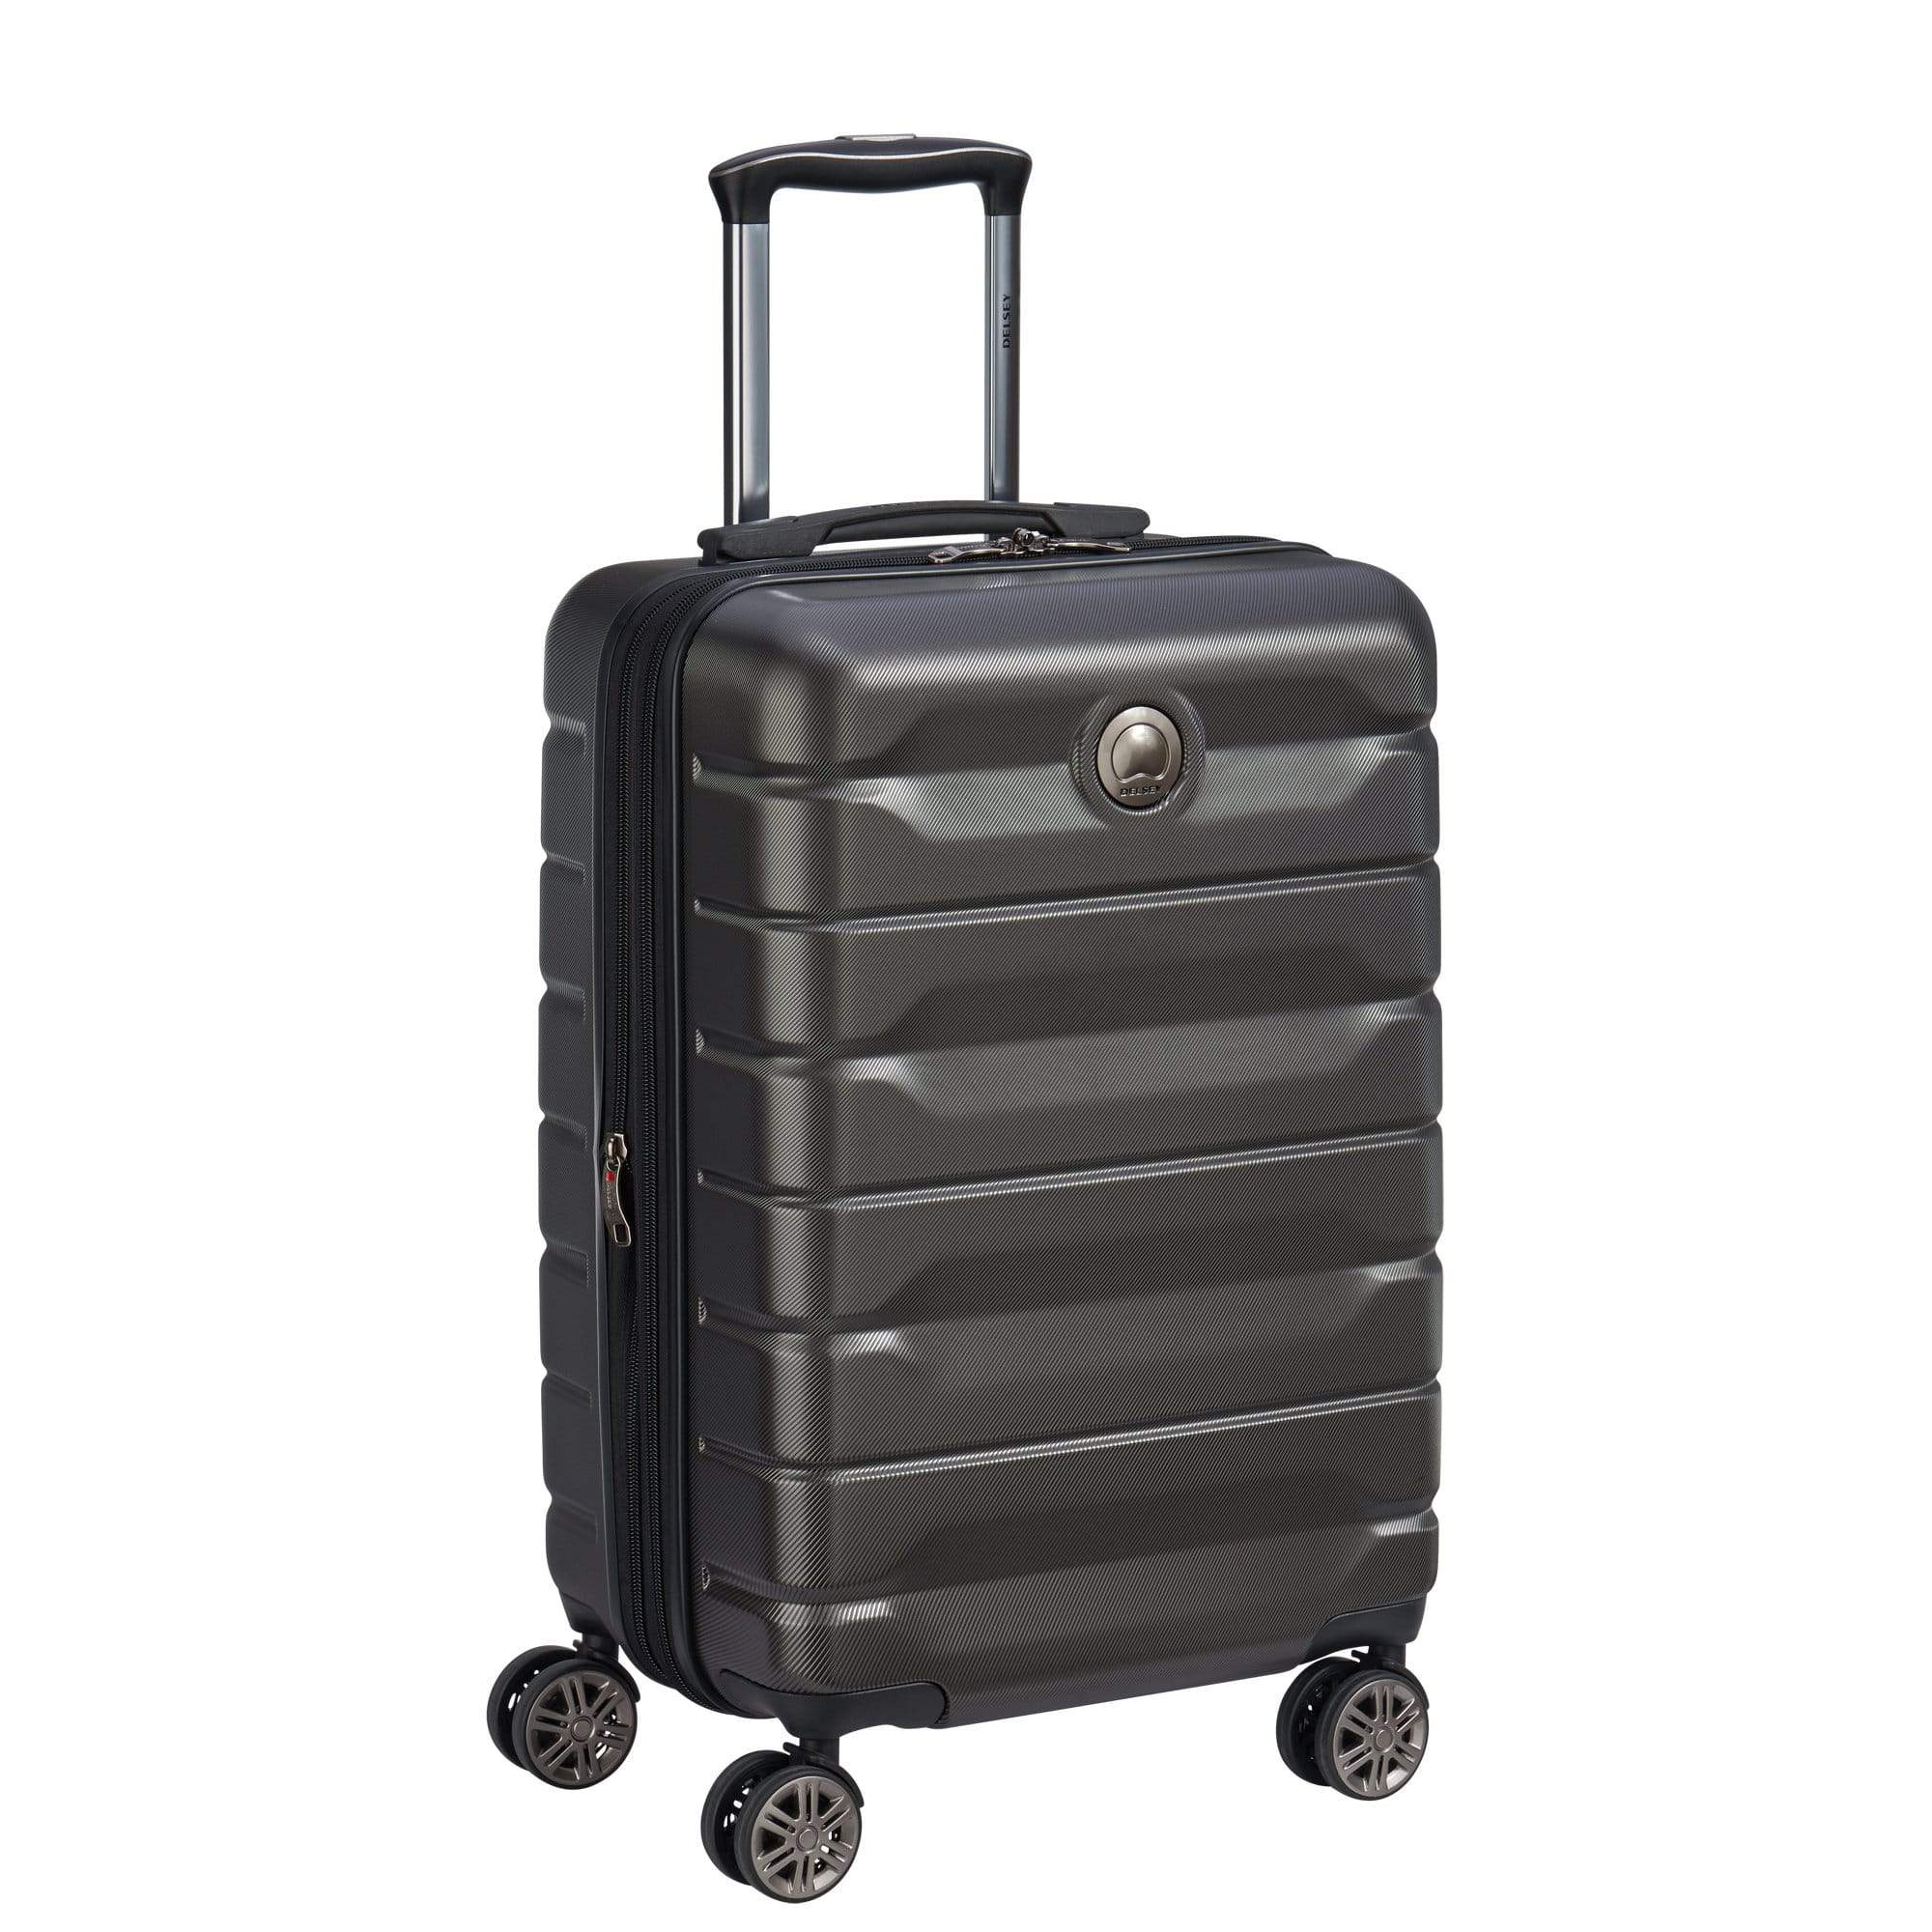 Delsey Air Amour 55cm Hardcase 4 Wheel Expandable Cabin Luggage Trolley Black - 00386680100T9